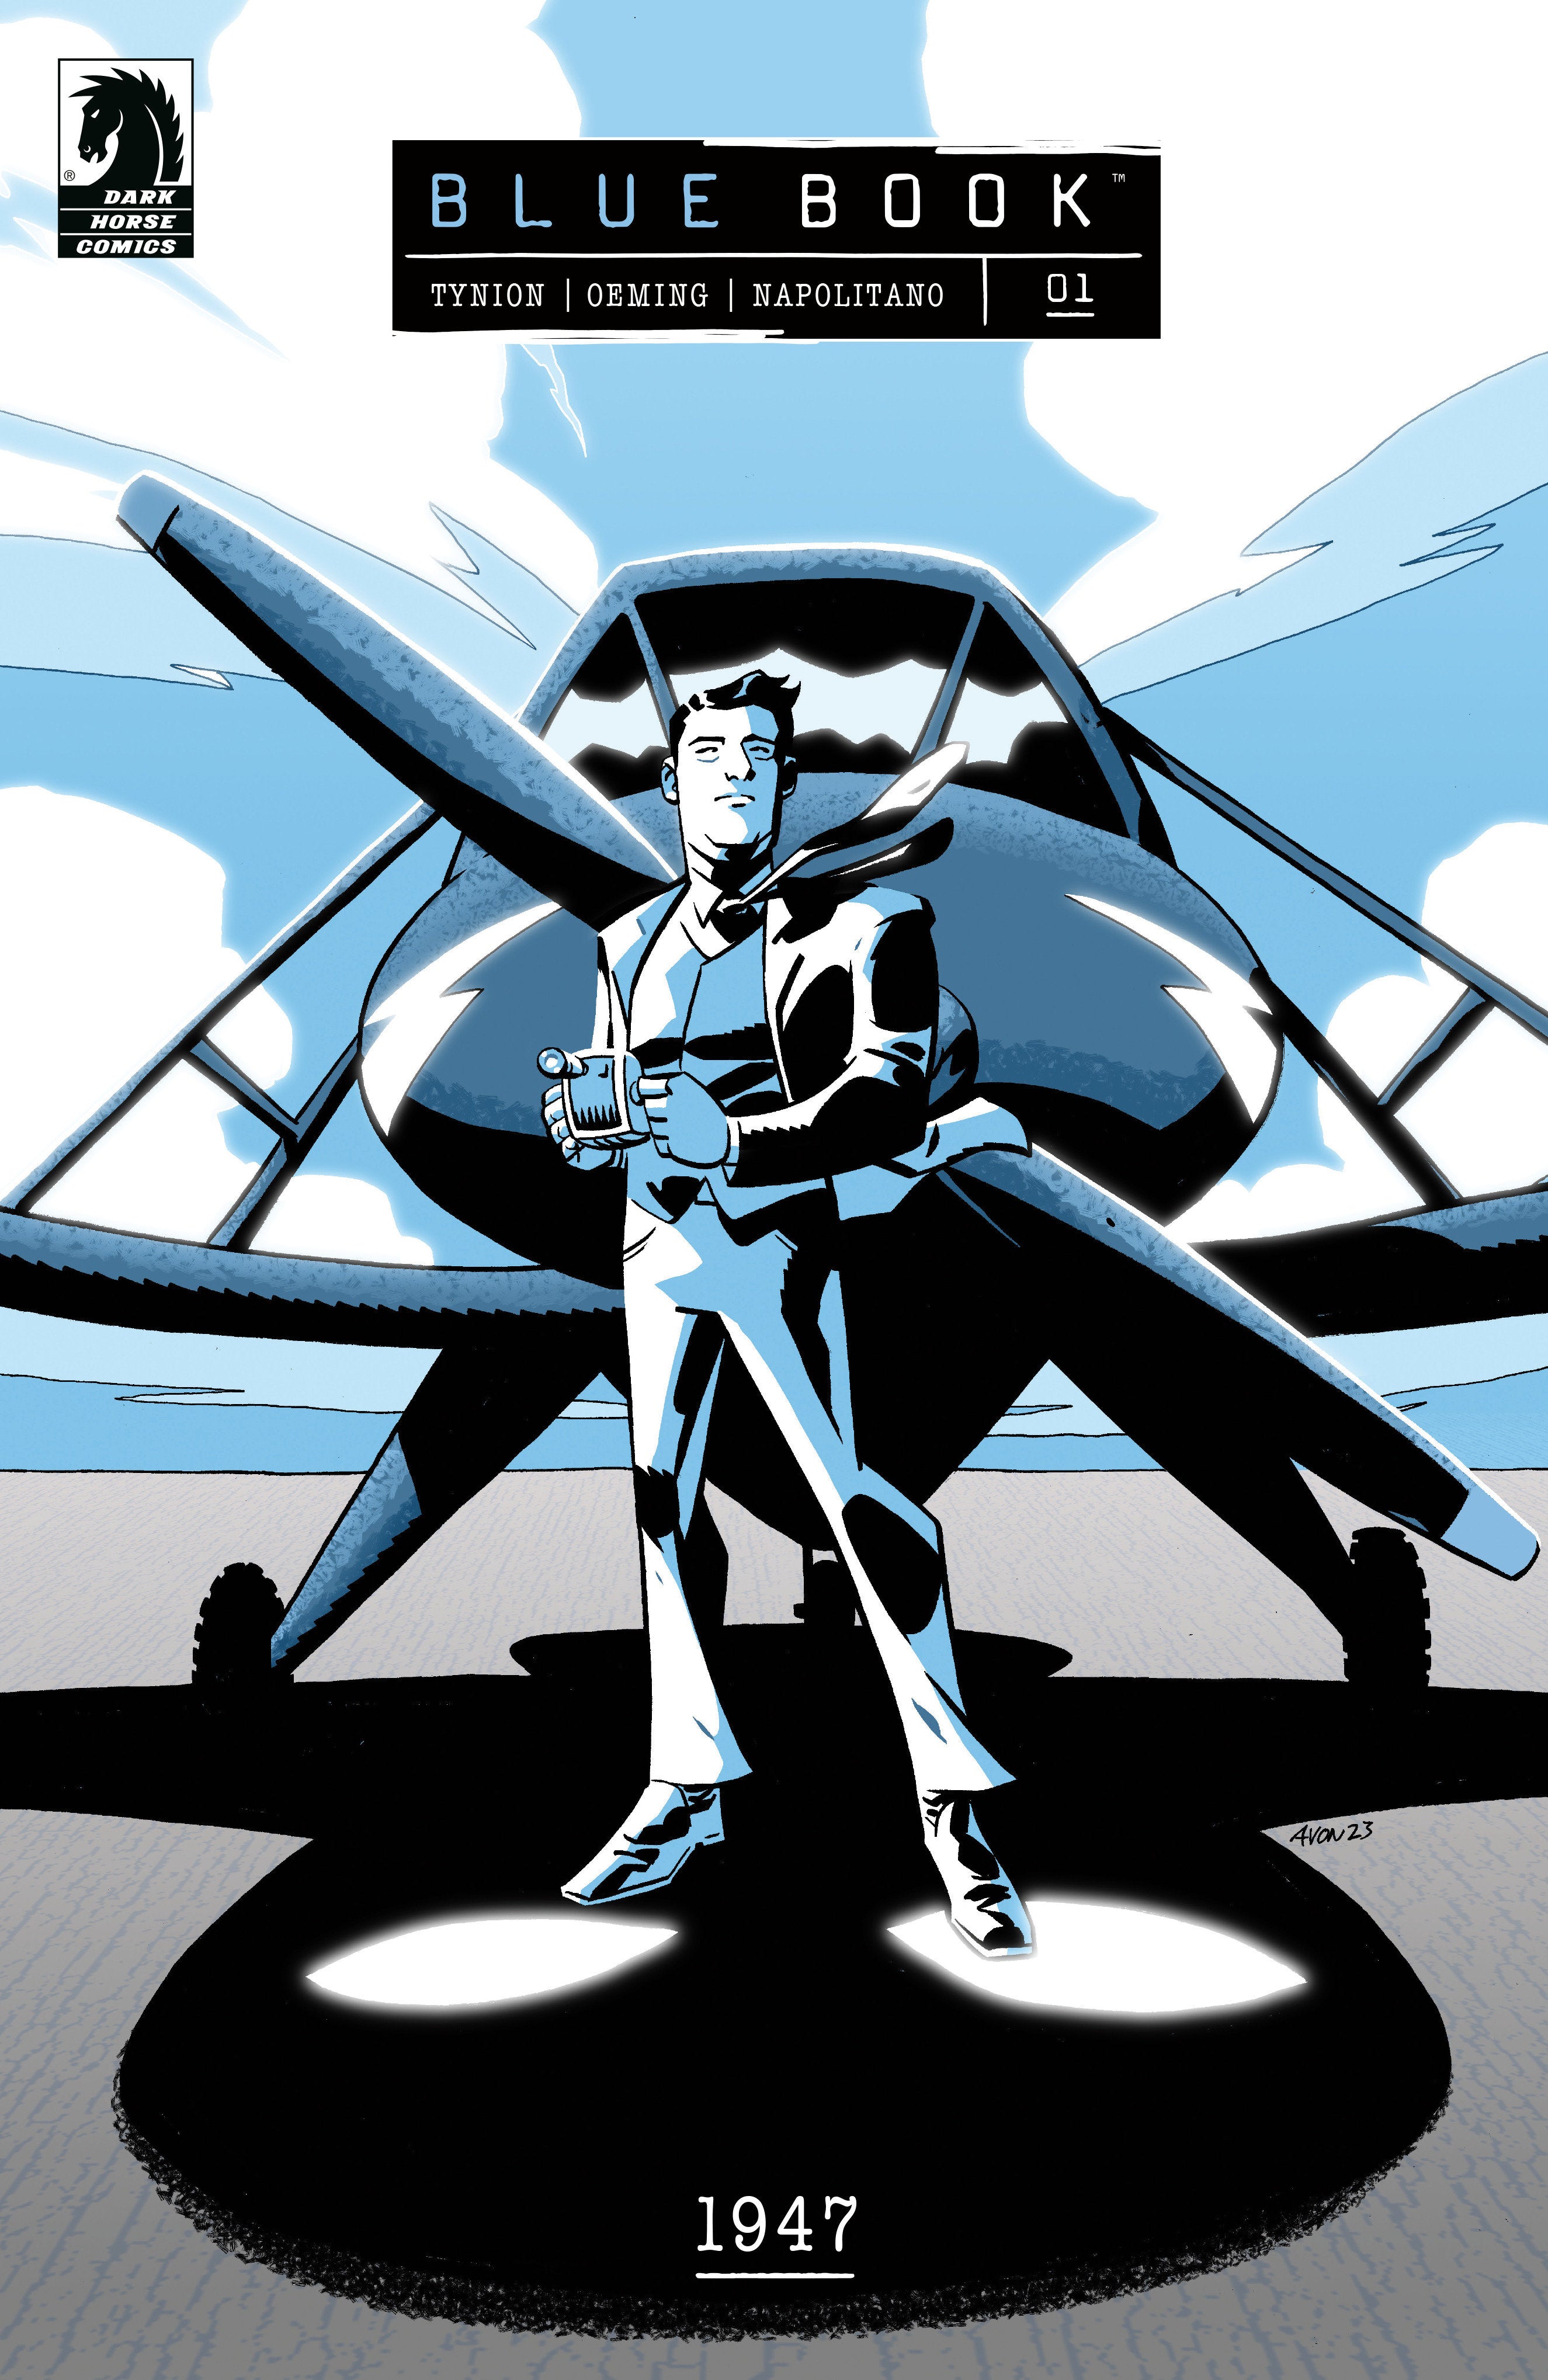 Blue Book: 1947 #1 (COVER A) (Michael Avon Oeming)